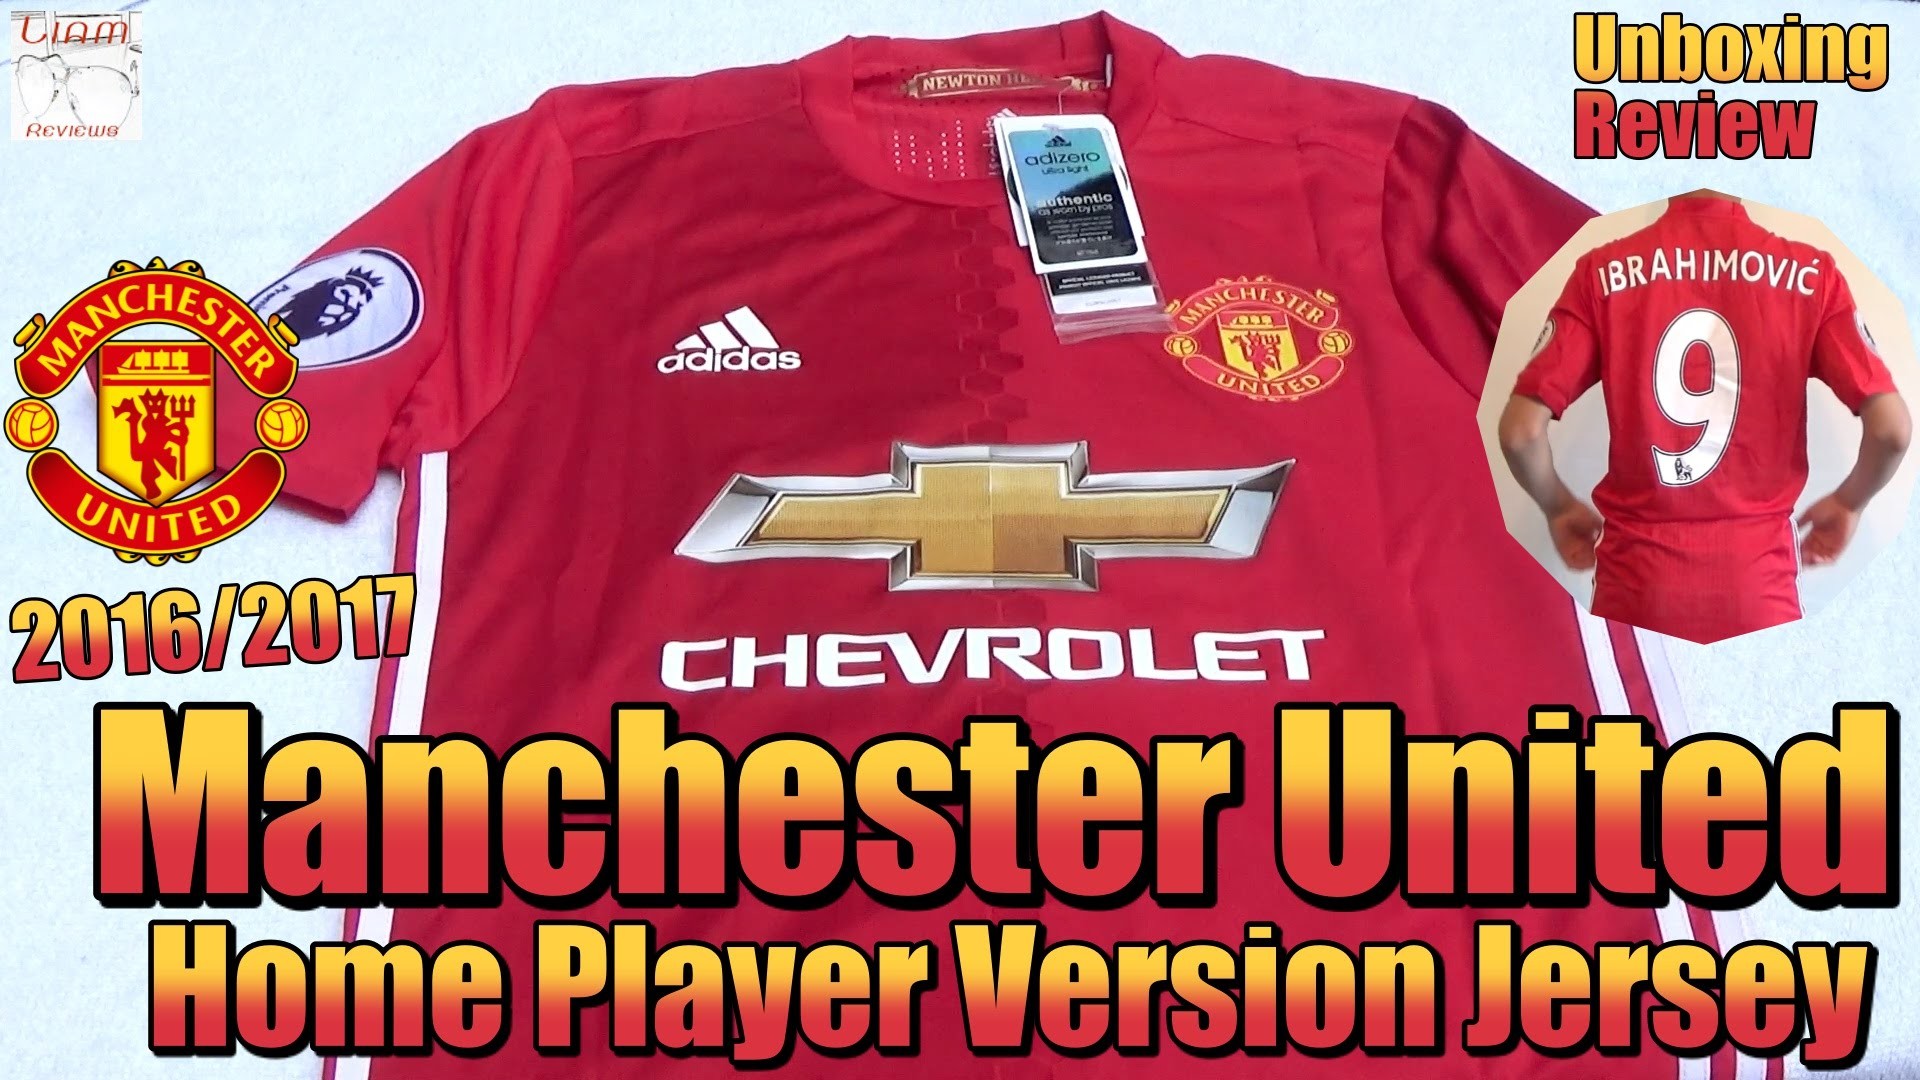 1920x1080 Adidas 2016/17 Manchester United Home Jersey | Zlatan Ibrahimovic #9 |  Unboxing/Review - YouTube